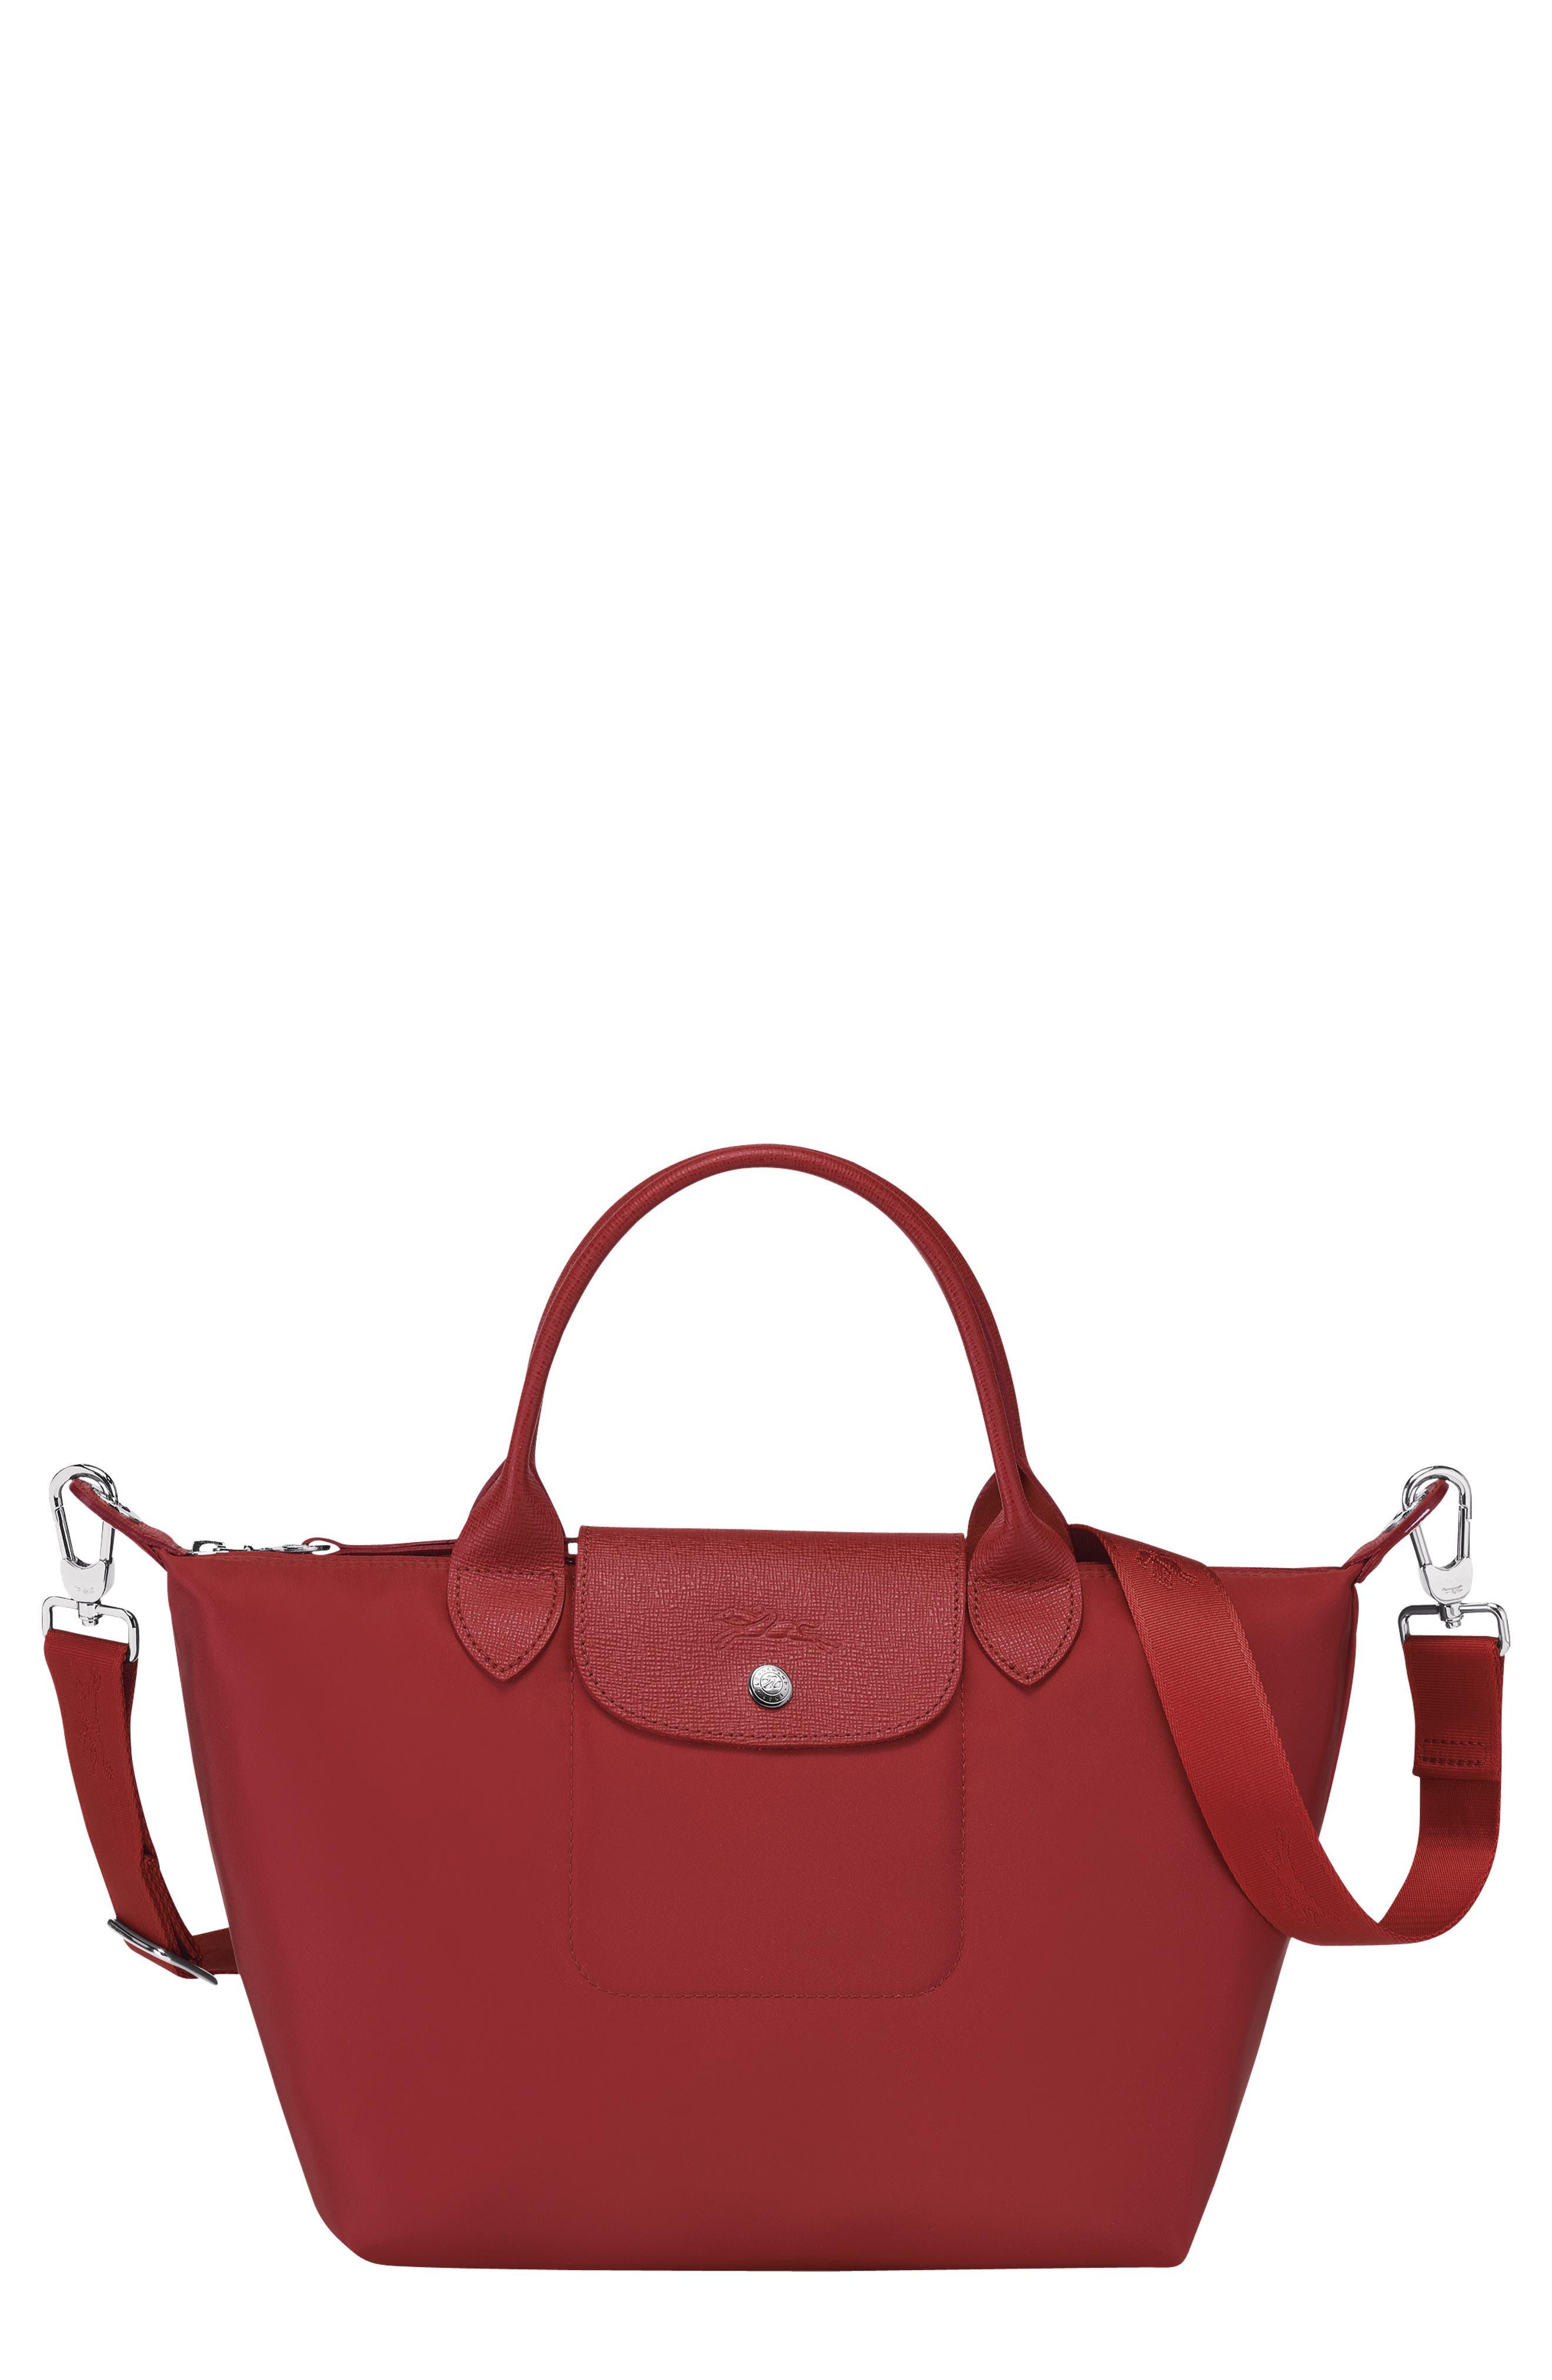 Longchamp Le Pliage Neo Small Top Handle Bag in Red